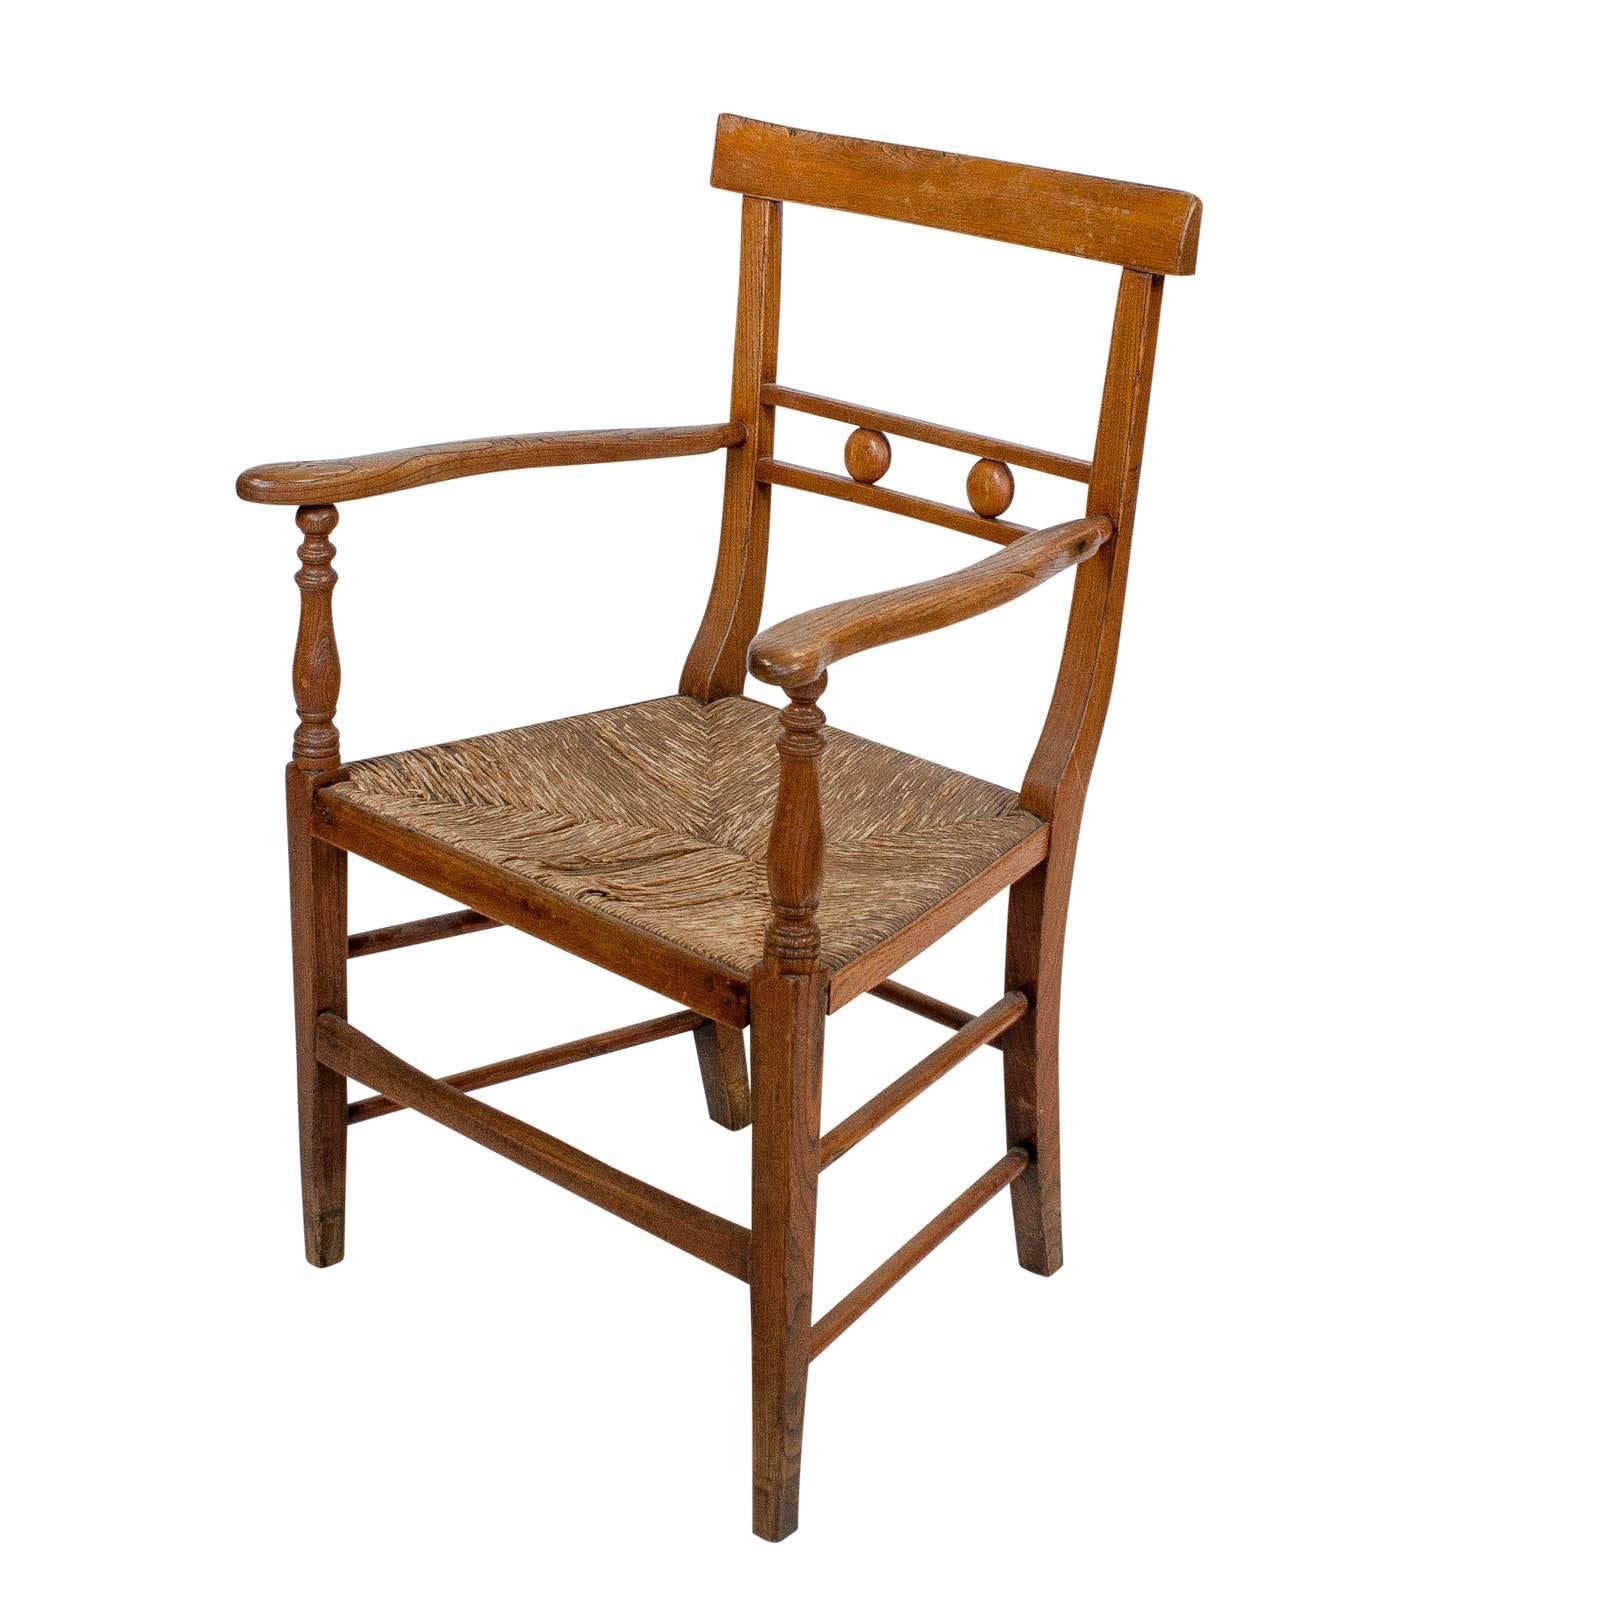 French Provincial Provincial French Fruitwood Armchair, circa 1830